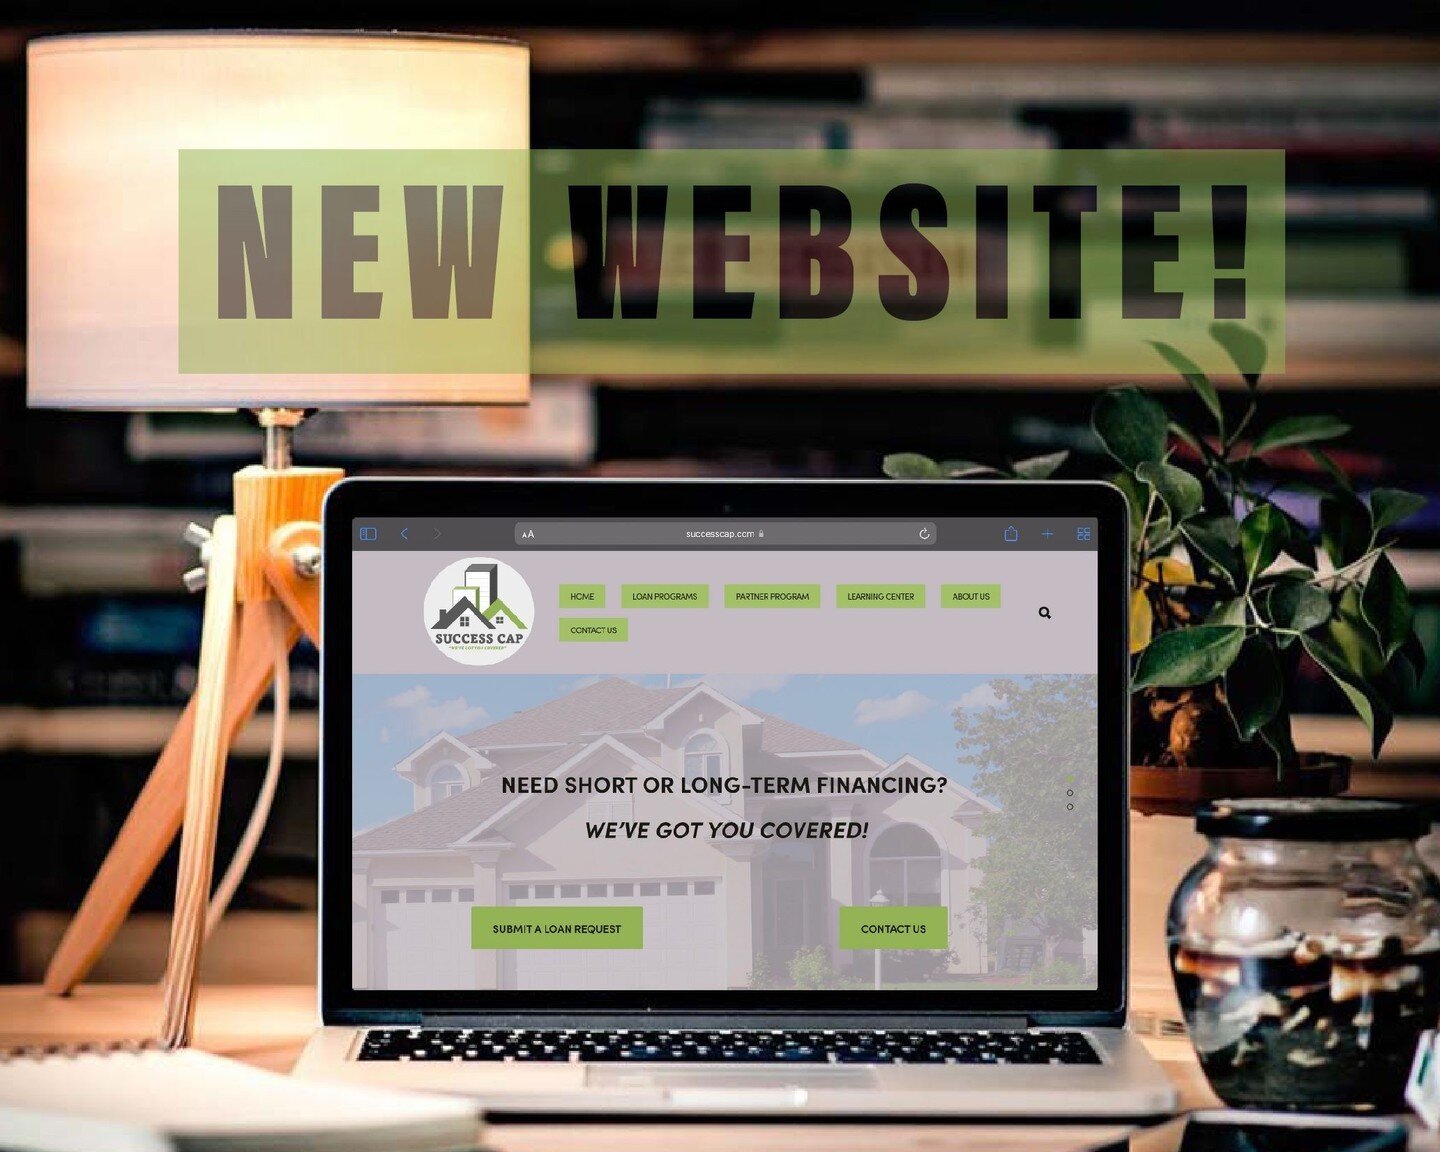 ❗️Our new website is LIVE❗️
🔗 SuccessCap.com🔗
▫️Full visual overhaul &amp; redesigned logo
▫️Updated loan product info
▫️Easy application process 
▫️Recently funded deals with testimonials 

#realestate #broker #centralflorida #orlando #tampabayare